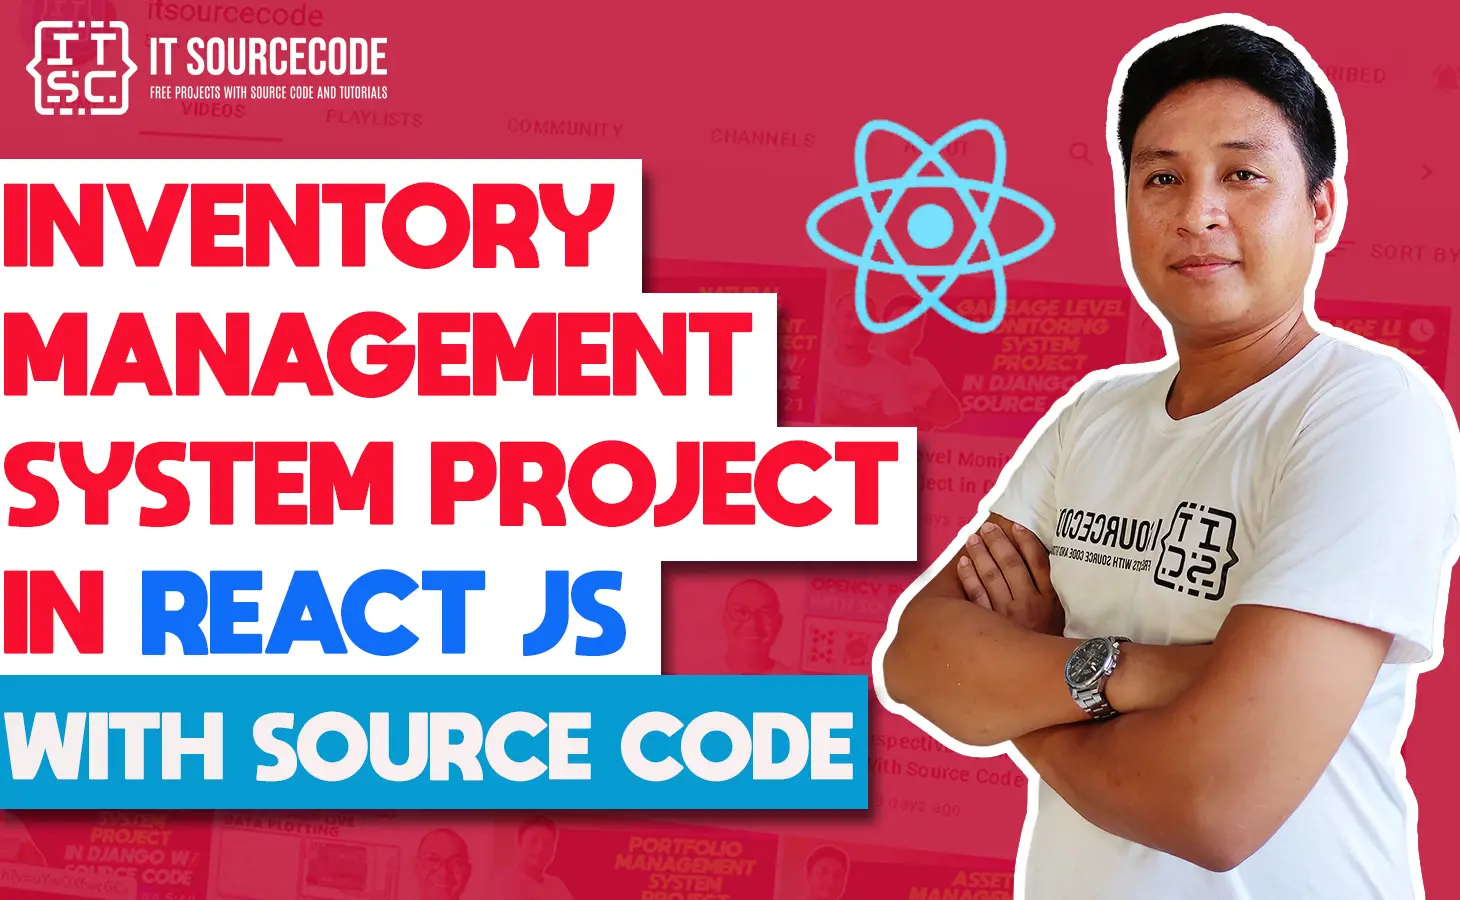 Inventory Management System Project in React JS with Source Code